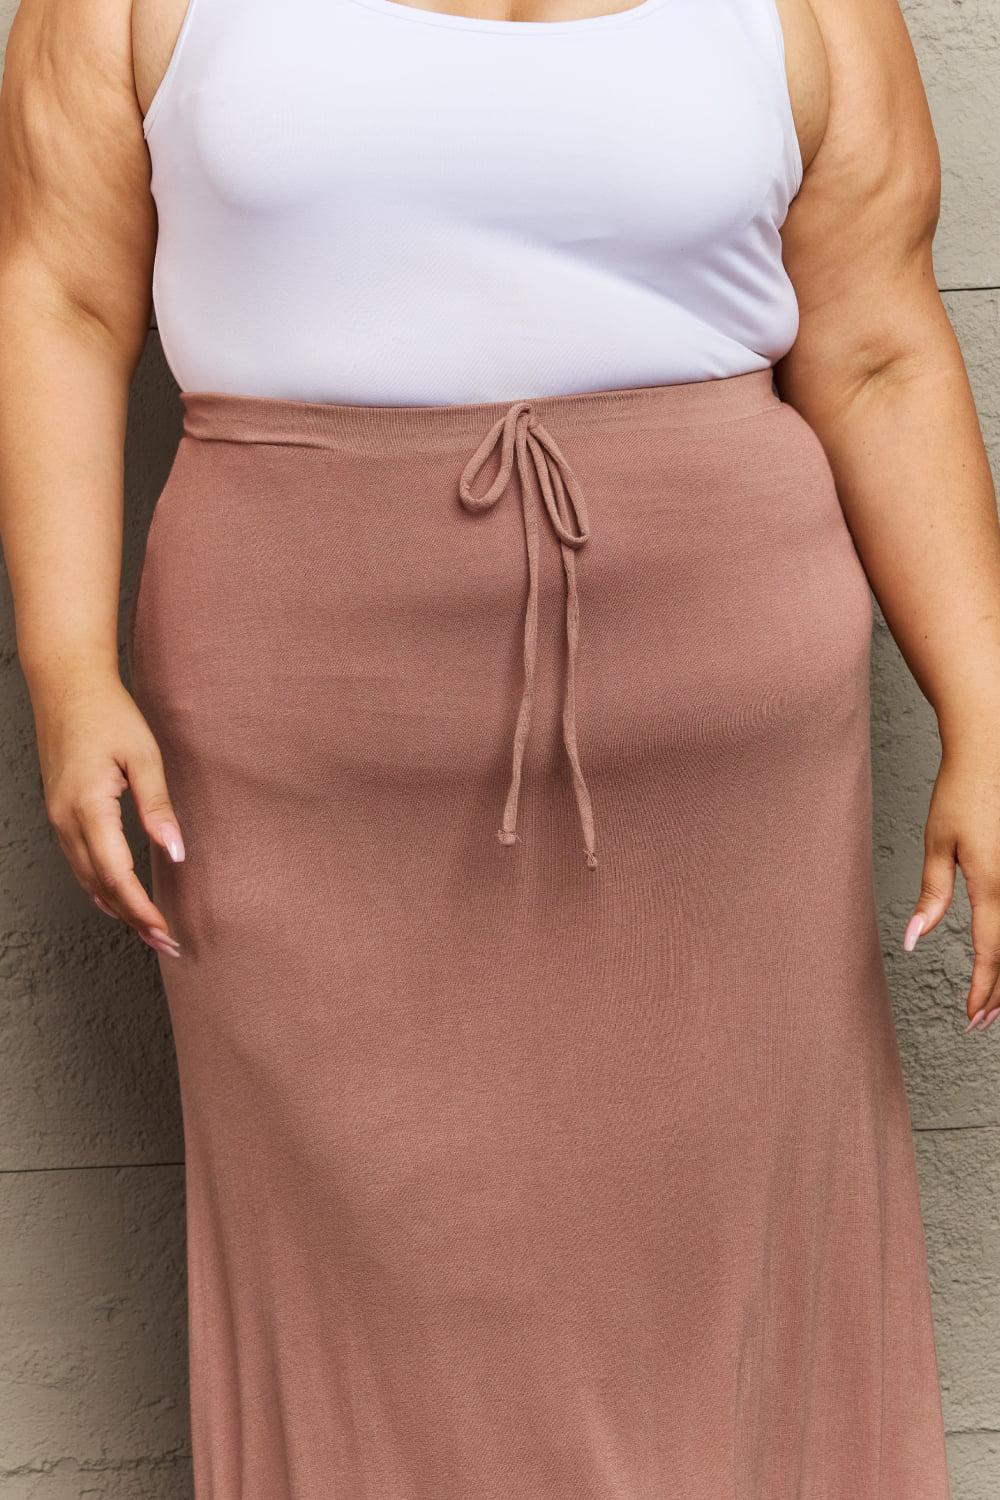 Culture Code For The Day Full Size Flare Maxi Skirt in Chocolate BLUE ZONE PLANET